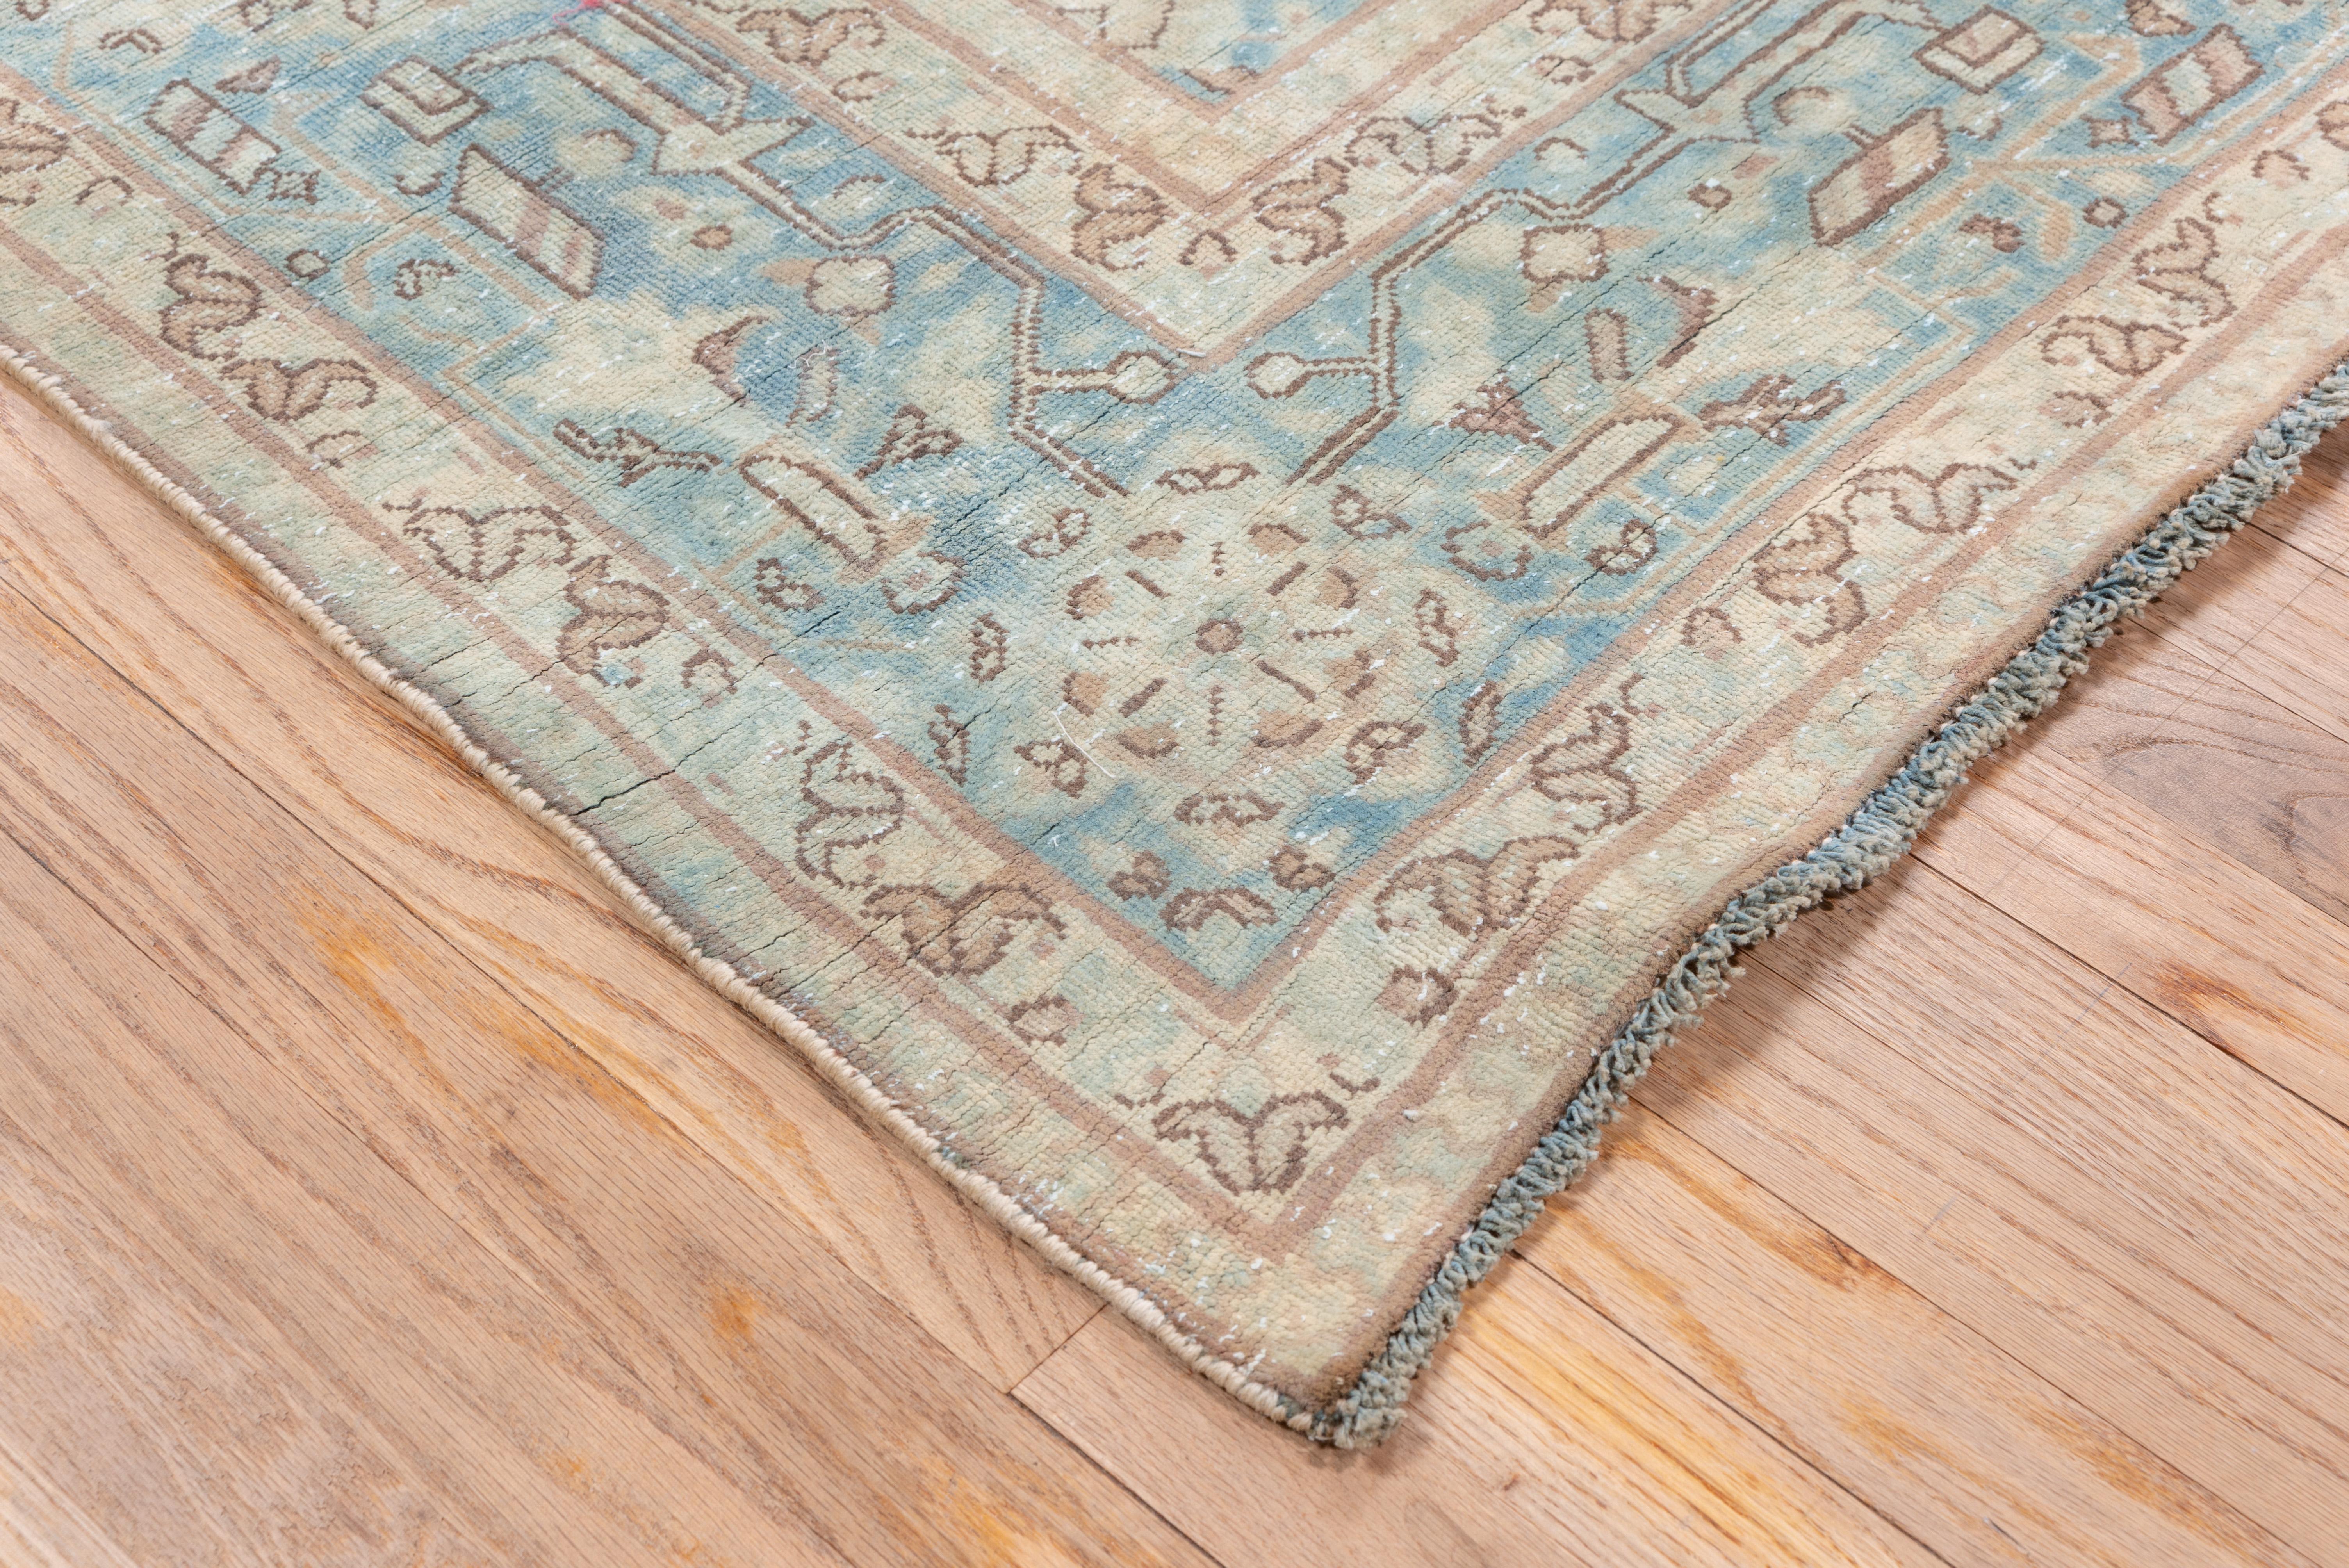 This light blue persian Kerman rug has a Powder blue field with an allover pattern of octofoil stars and rosette-guls, Pale blue border with complex rosettes and stiff stems. General even wear, fairly good condition, Well-woven NW Persian city